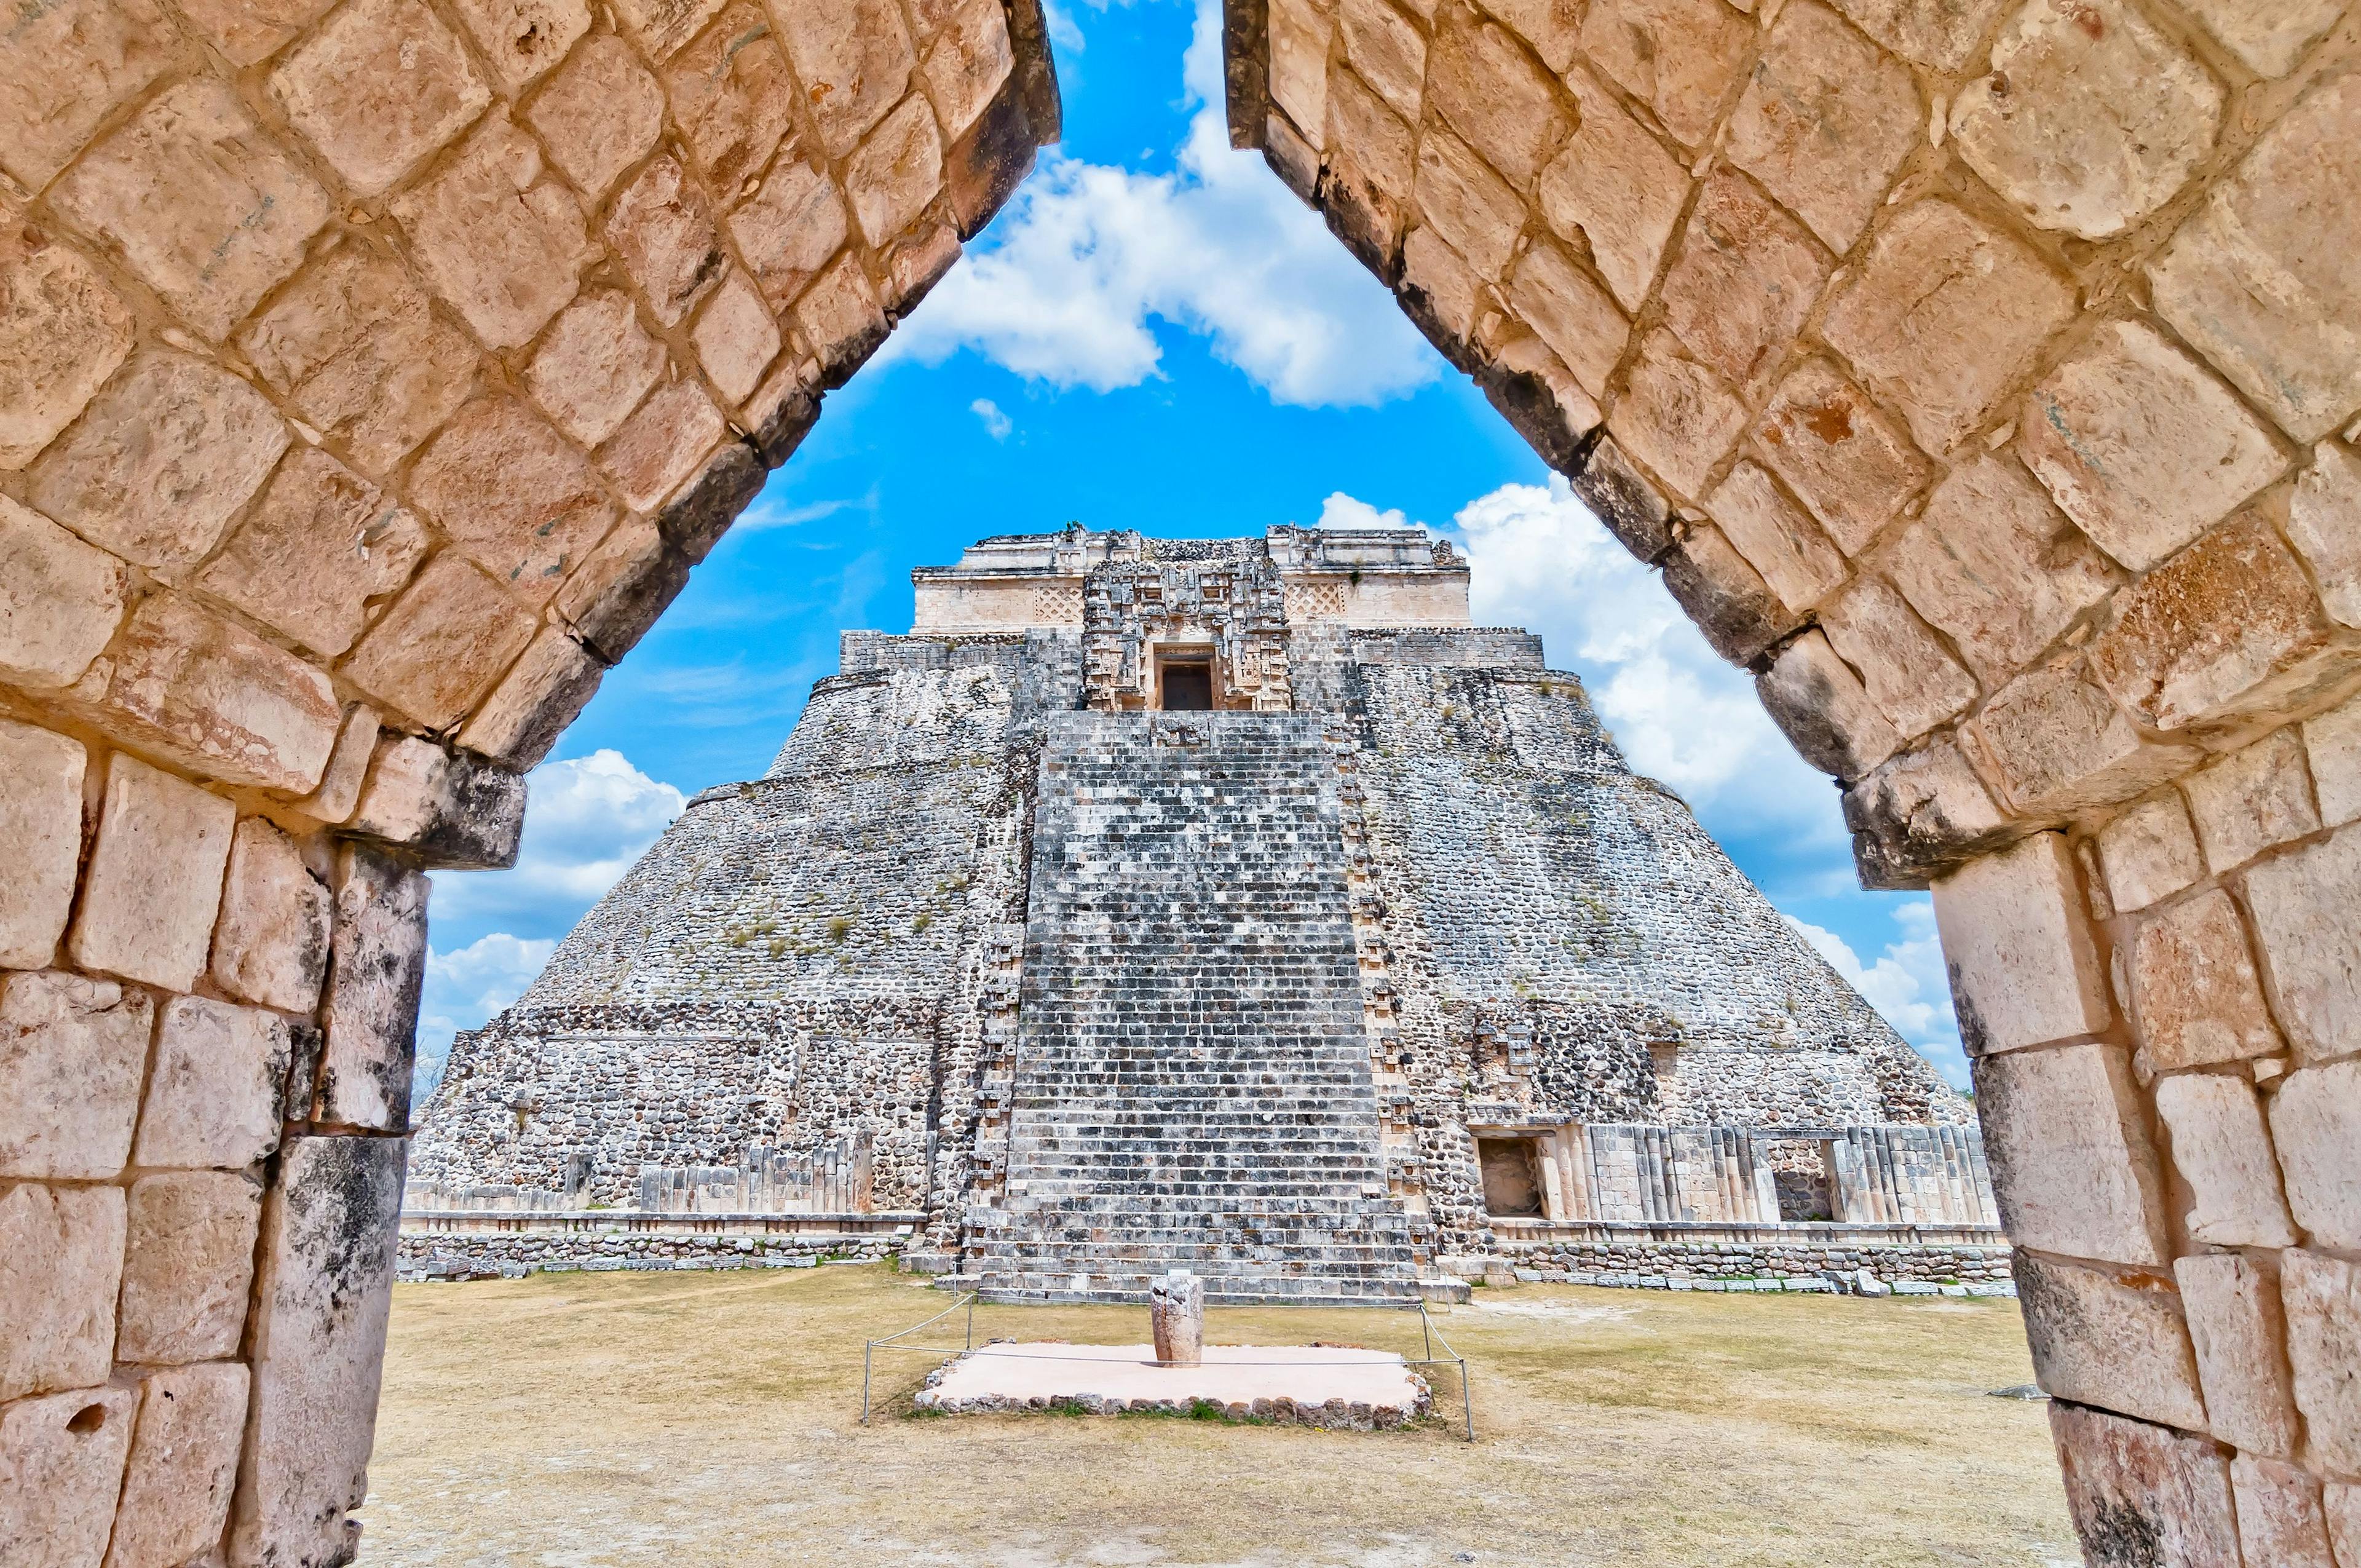 The Pyramid of the Magician is the central structure in the Maya ruin complex of Uxmal, Mexico